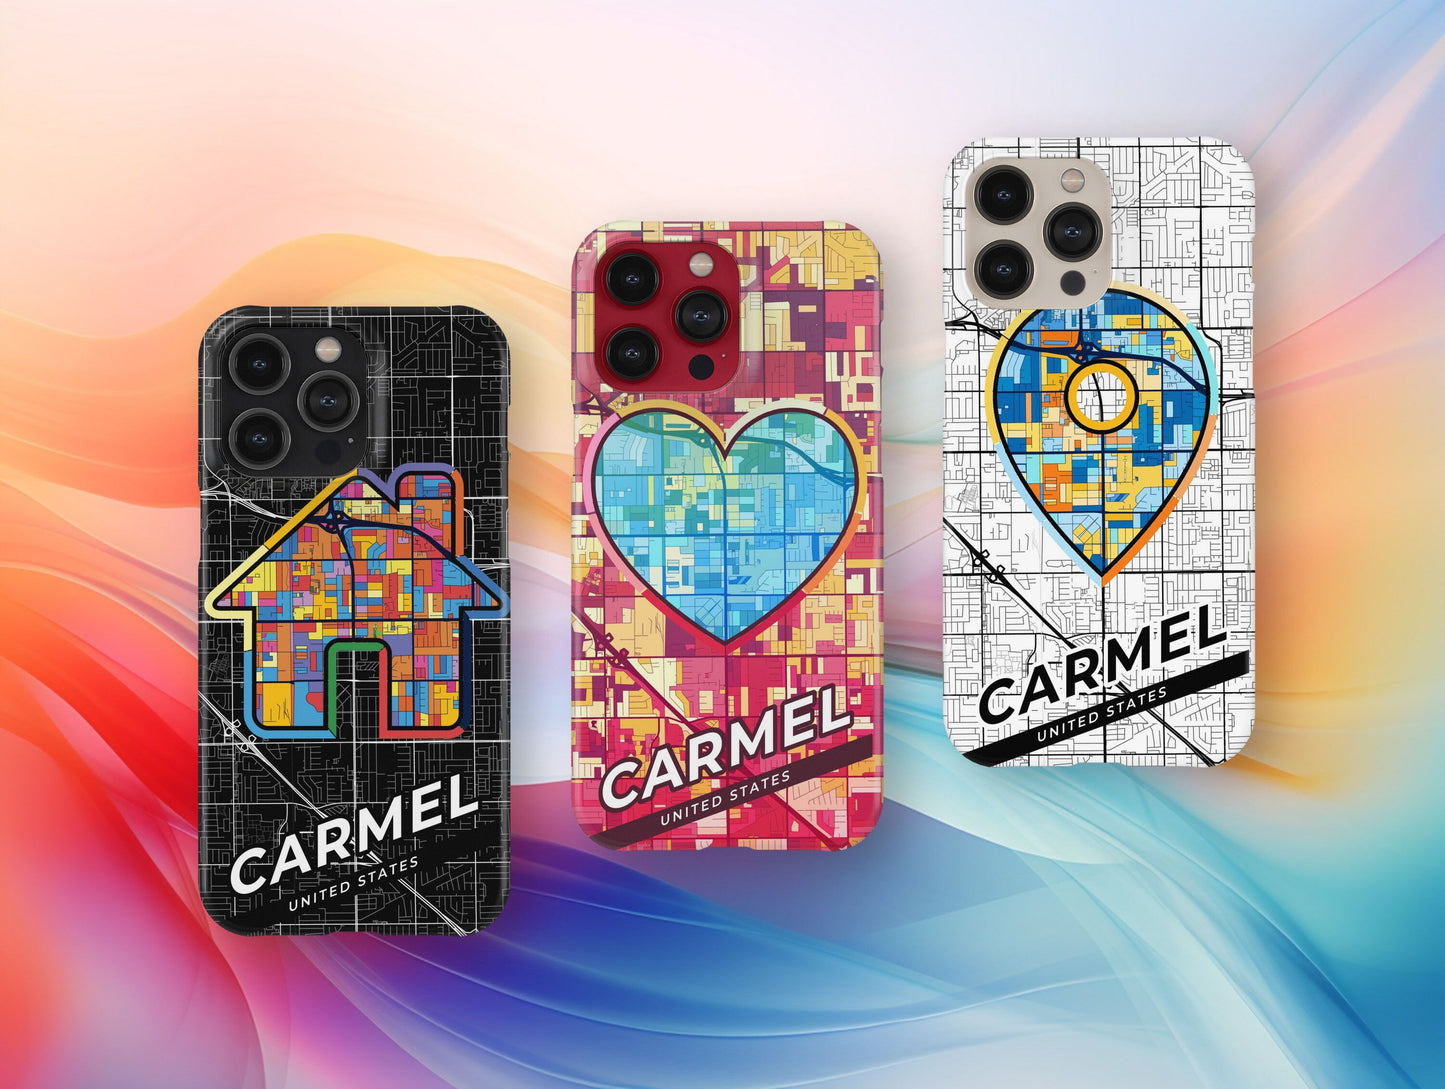 Carmel Indiana slim phone case with colorful icon. Birthday, wedding or housewarming gift. Couple match cases.